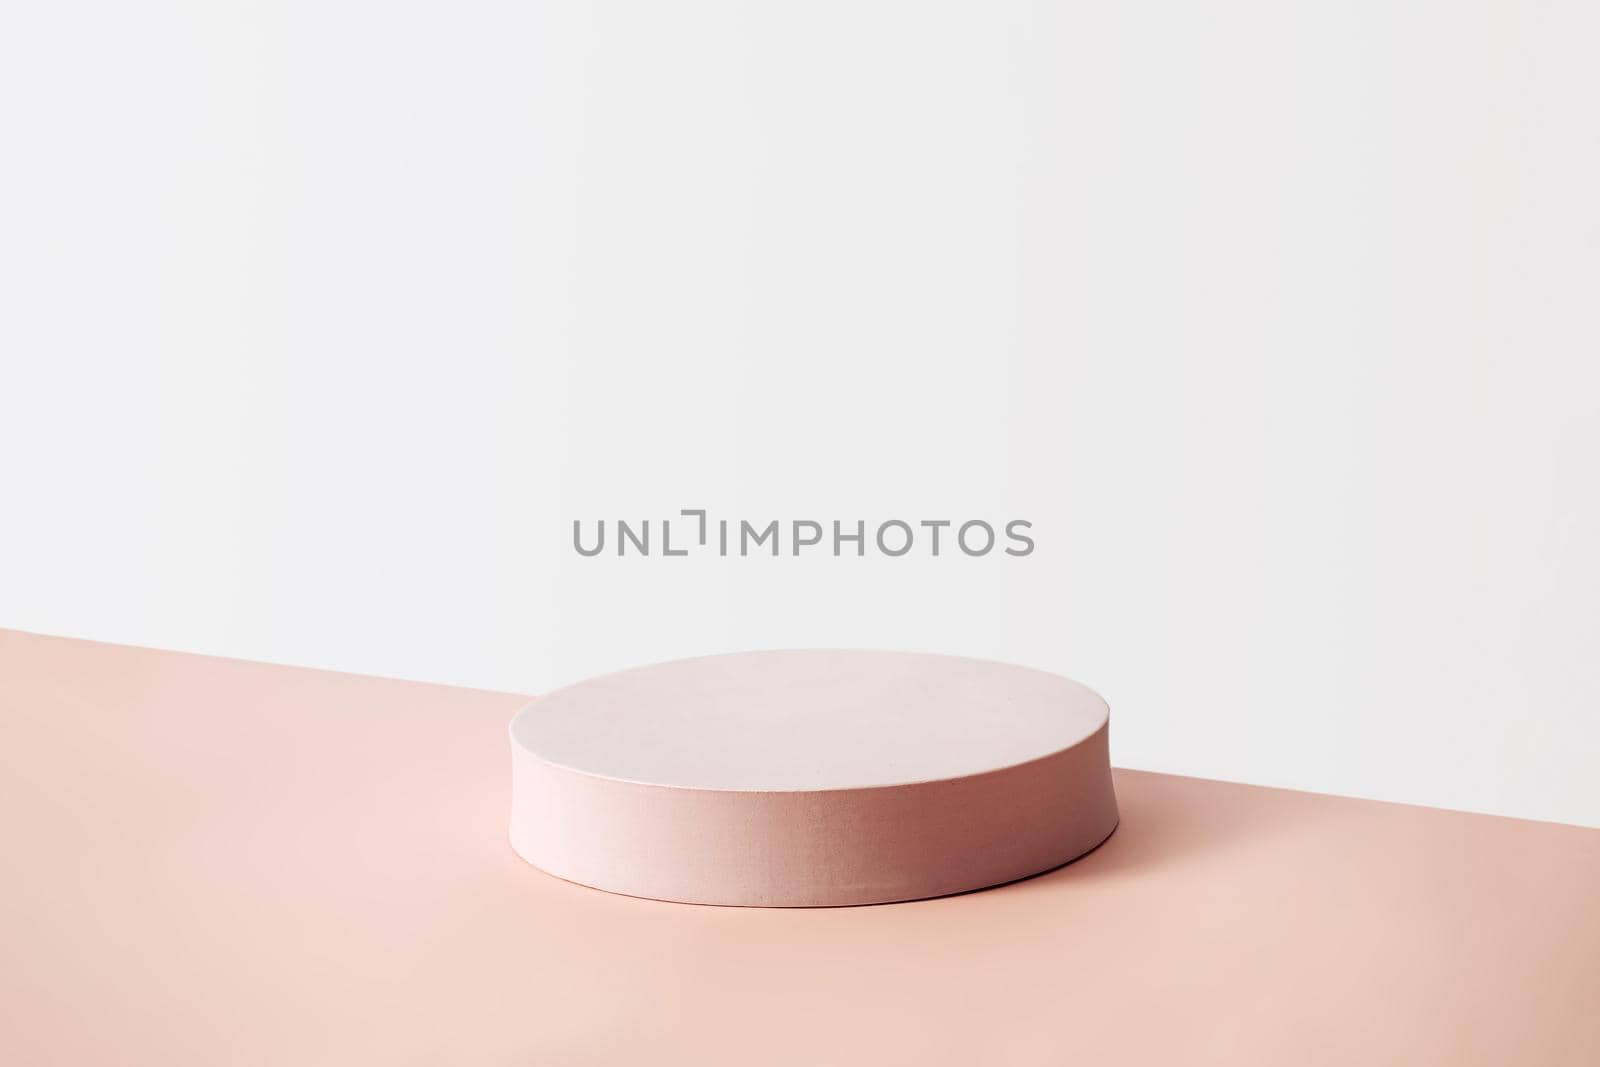 Product placement and advertising concept with empty display with a circular beige pedestal against an off white wall